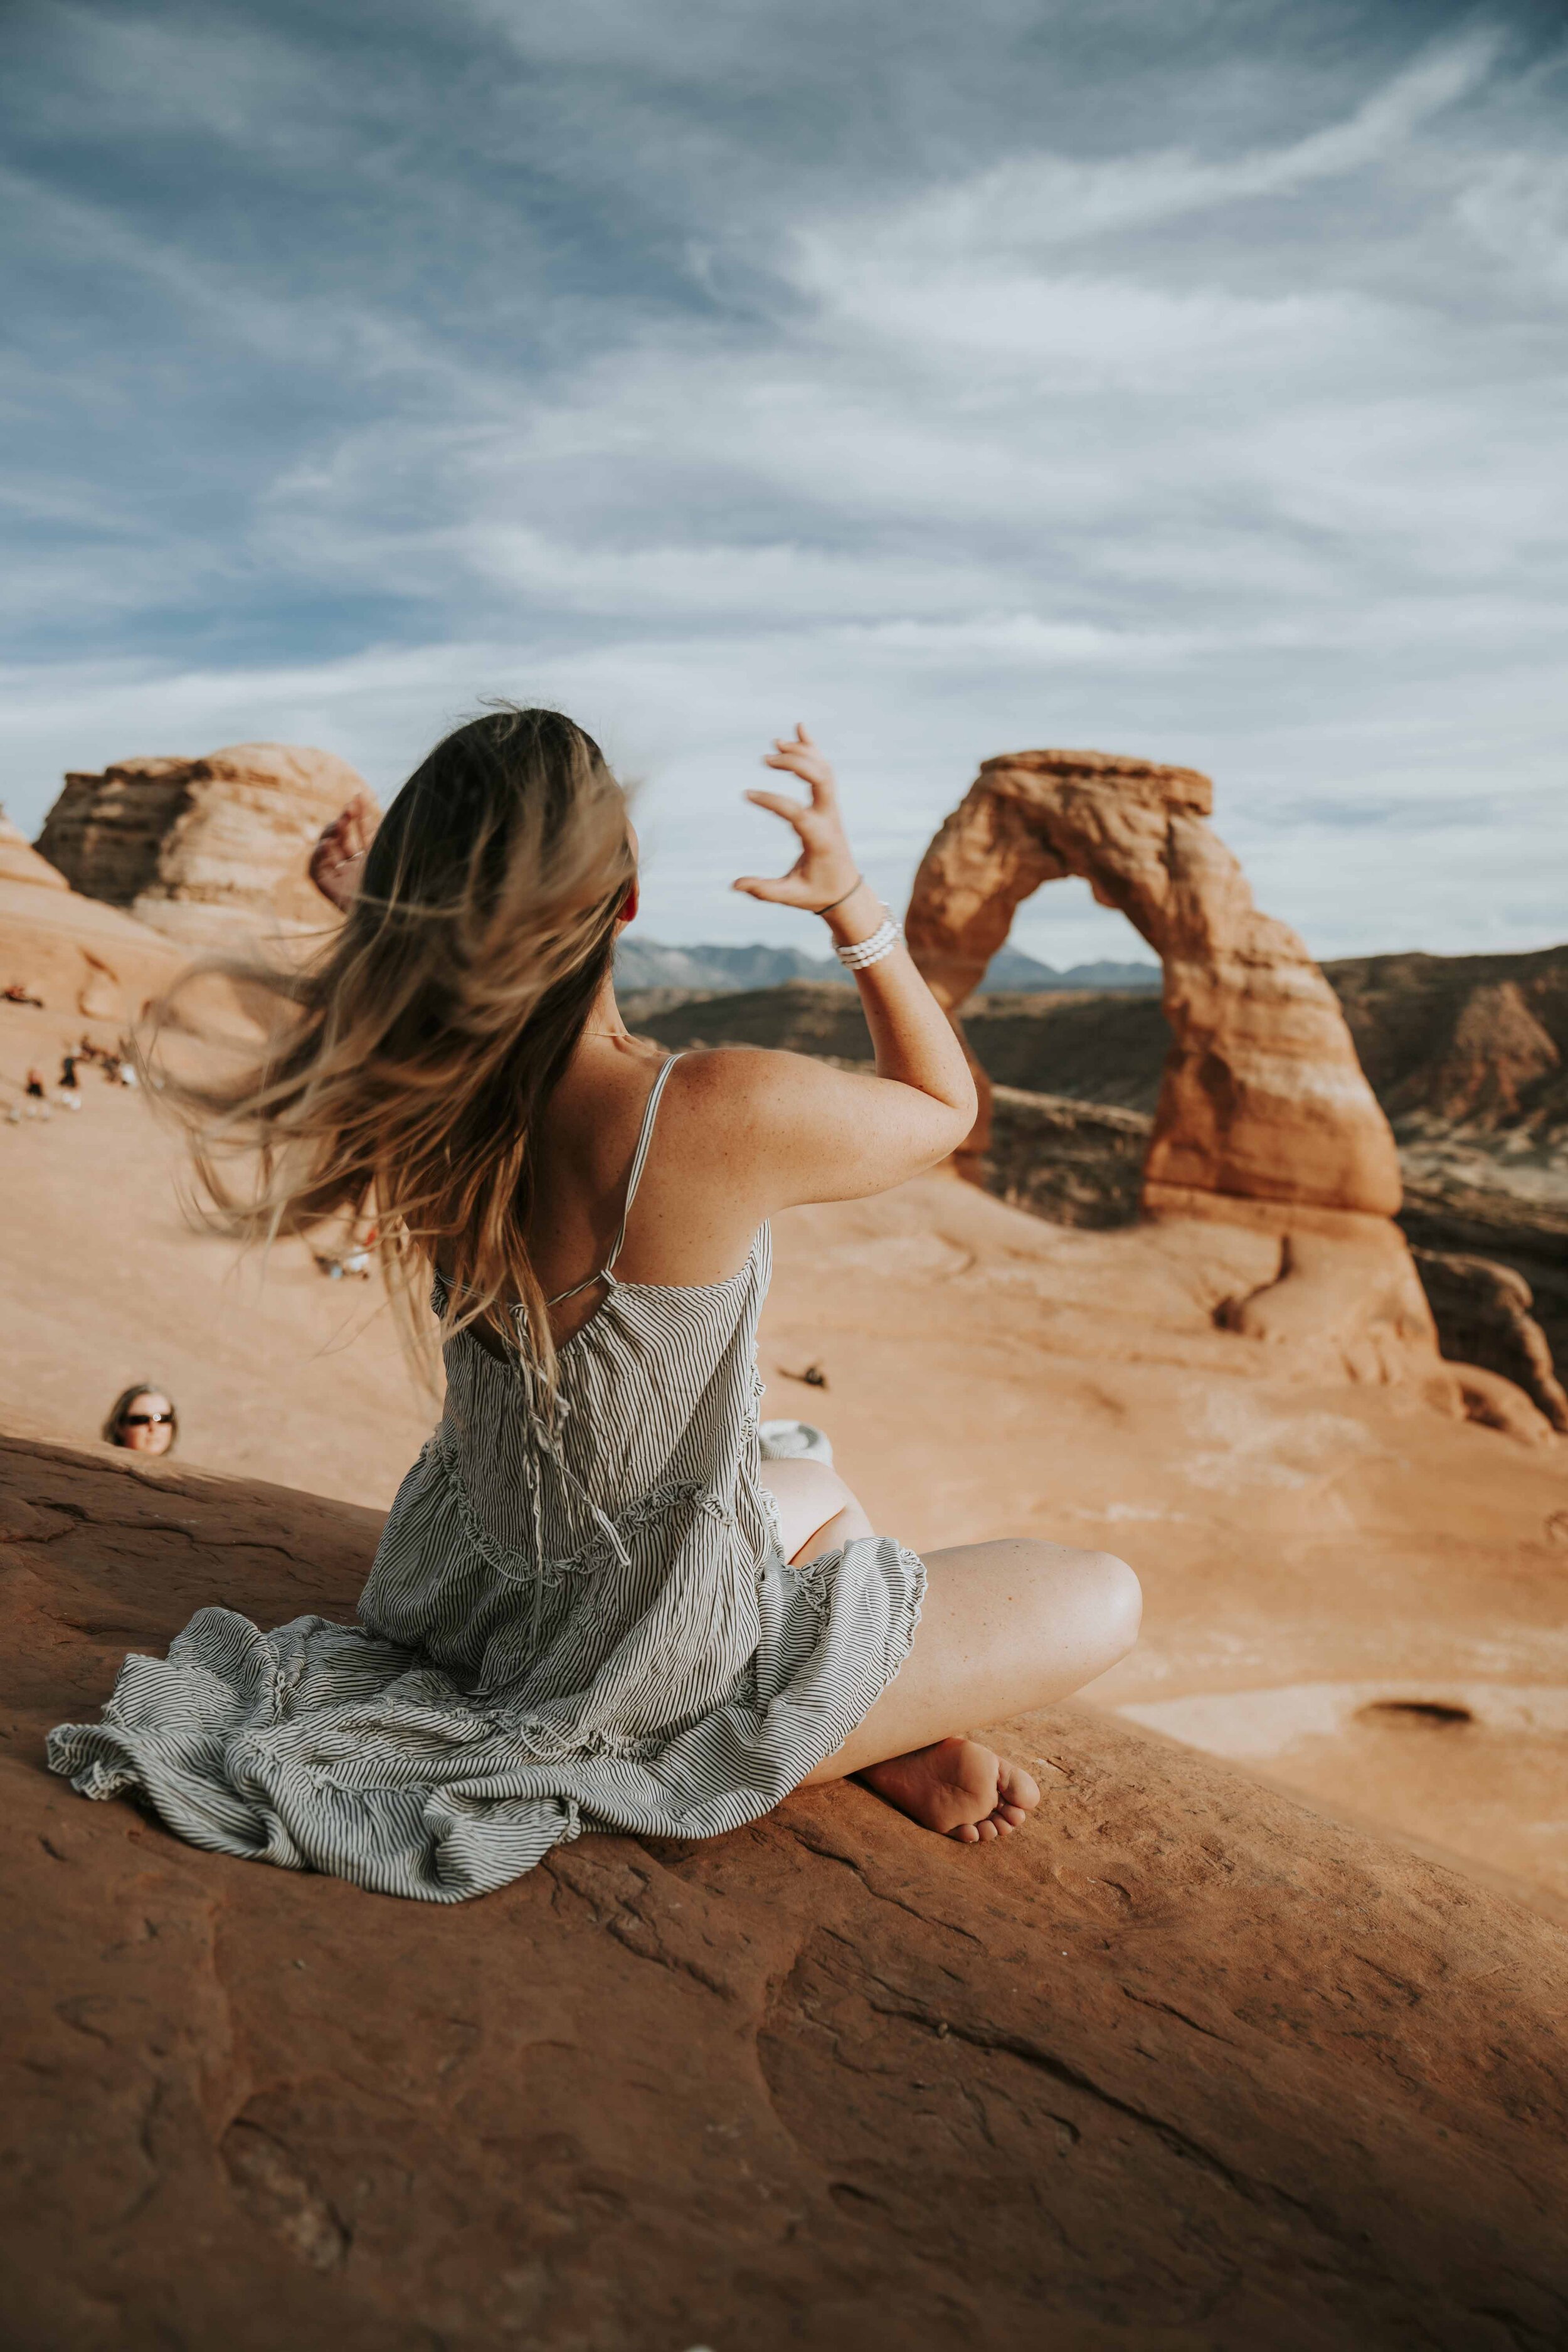 https://images.squarespace-cdn.com/content/v1/5a5c5861692ebeaf27cc1853/1596515977889-H9SWI0RCDJBWO2950172/Delicate+Arch+in+Arches+National+Park+in+Utah.+Get+the+perfect+7+day+Utah+road+trip+itnerary+and+Utah+road+trip+map+of+all+the+best+places+to+see+in+Utah.+%23utah+%23roadtrip+%23southwest+%7C+things+to+do+in+Utah+road+trip+%7C+things+to+do+in+Moab+Utah+%7C+Utah+road+trip+National+Parks+%7C+Utah+road+trip+itinerary+%7C+Utah+road+trip+map+%7C+Utah+road+trip+bucket+lists+%7C+Utah+road+trip+pictures+%7C+most+Instagrammable+places+in+Utah+%7C+Utah+travel+road+trips+%7C+one+week+Utah+road+trip+%7C+7+day+Utah+itinerary?format=2500w